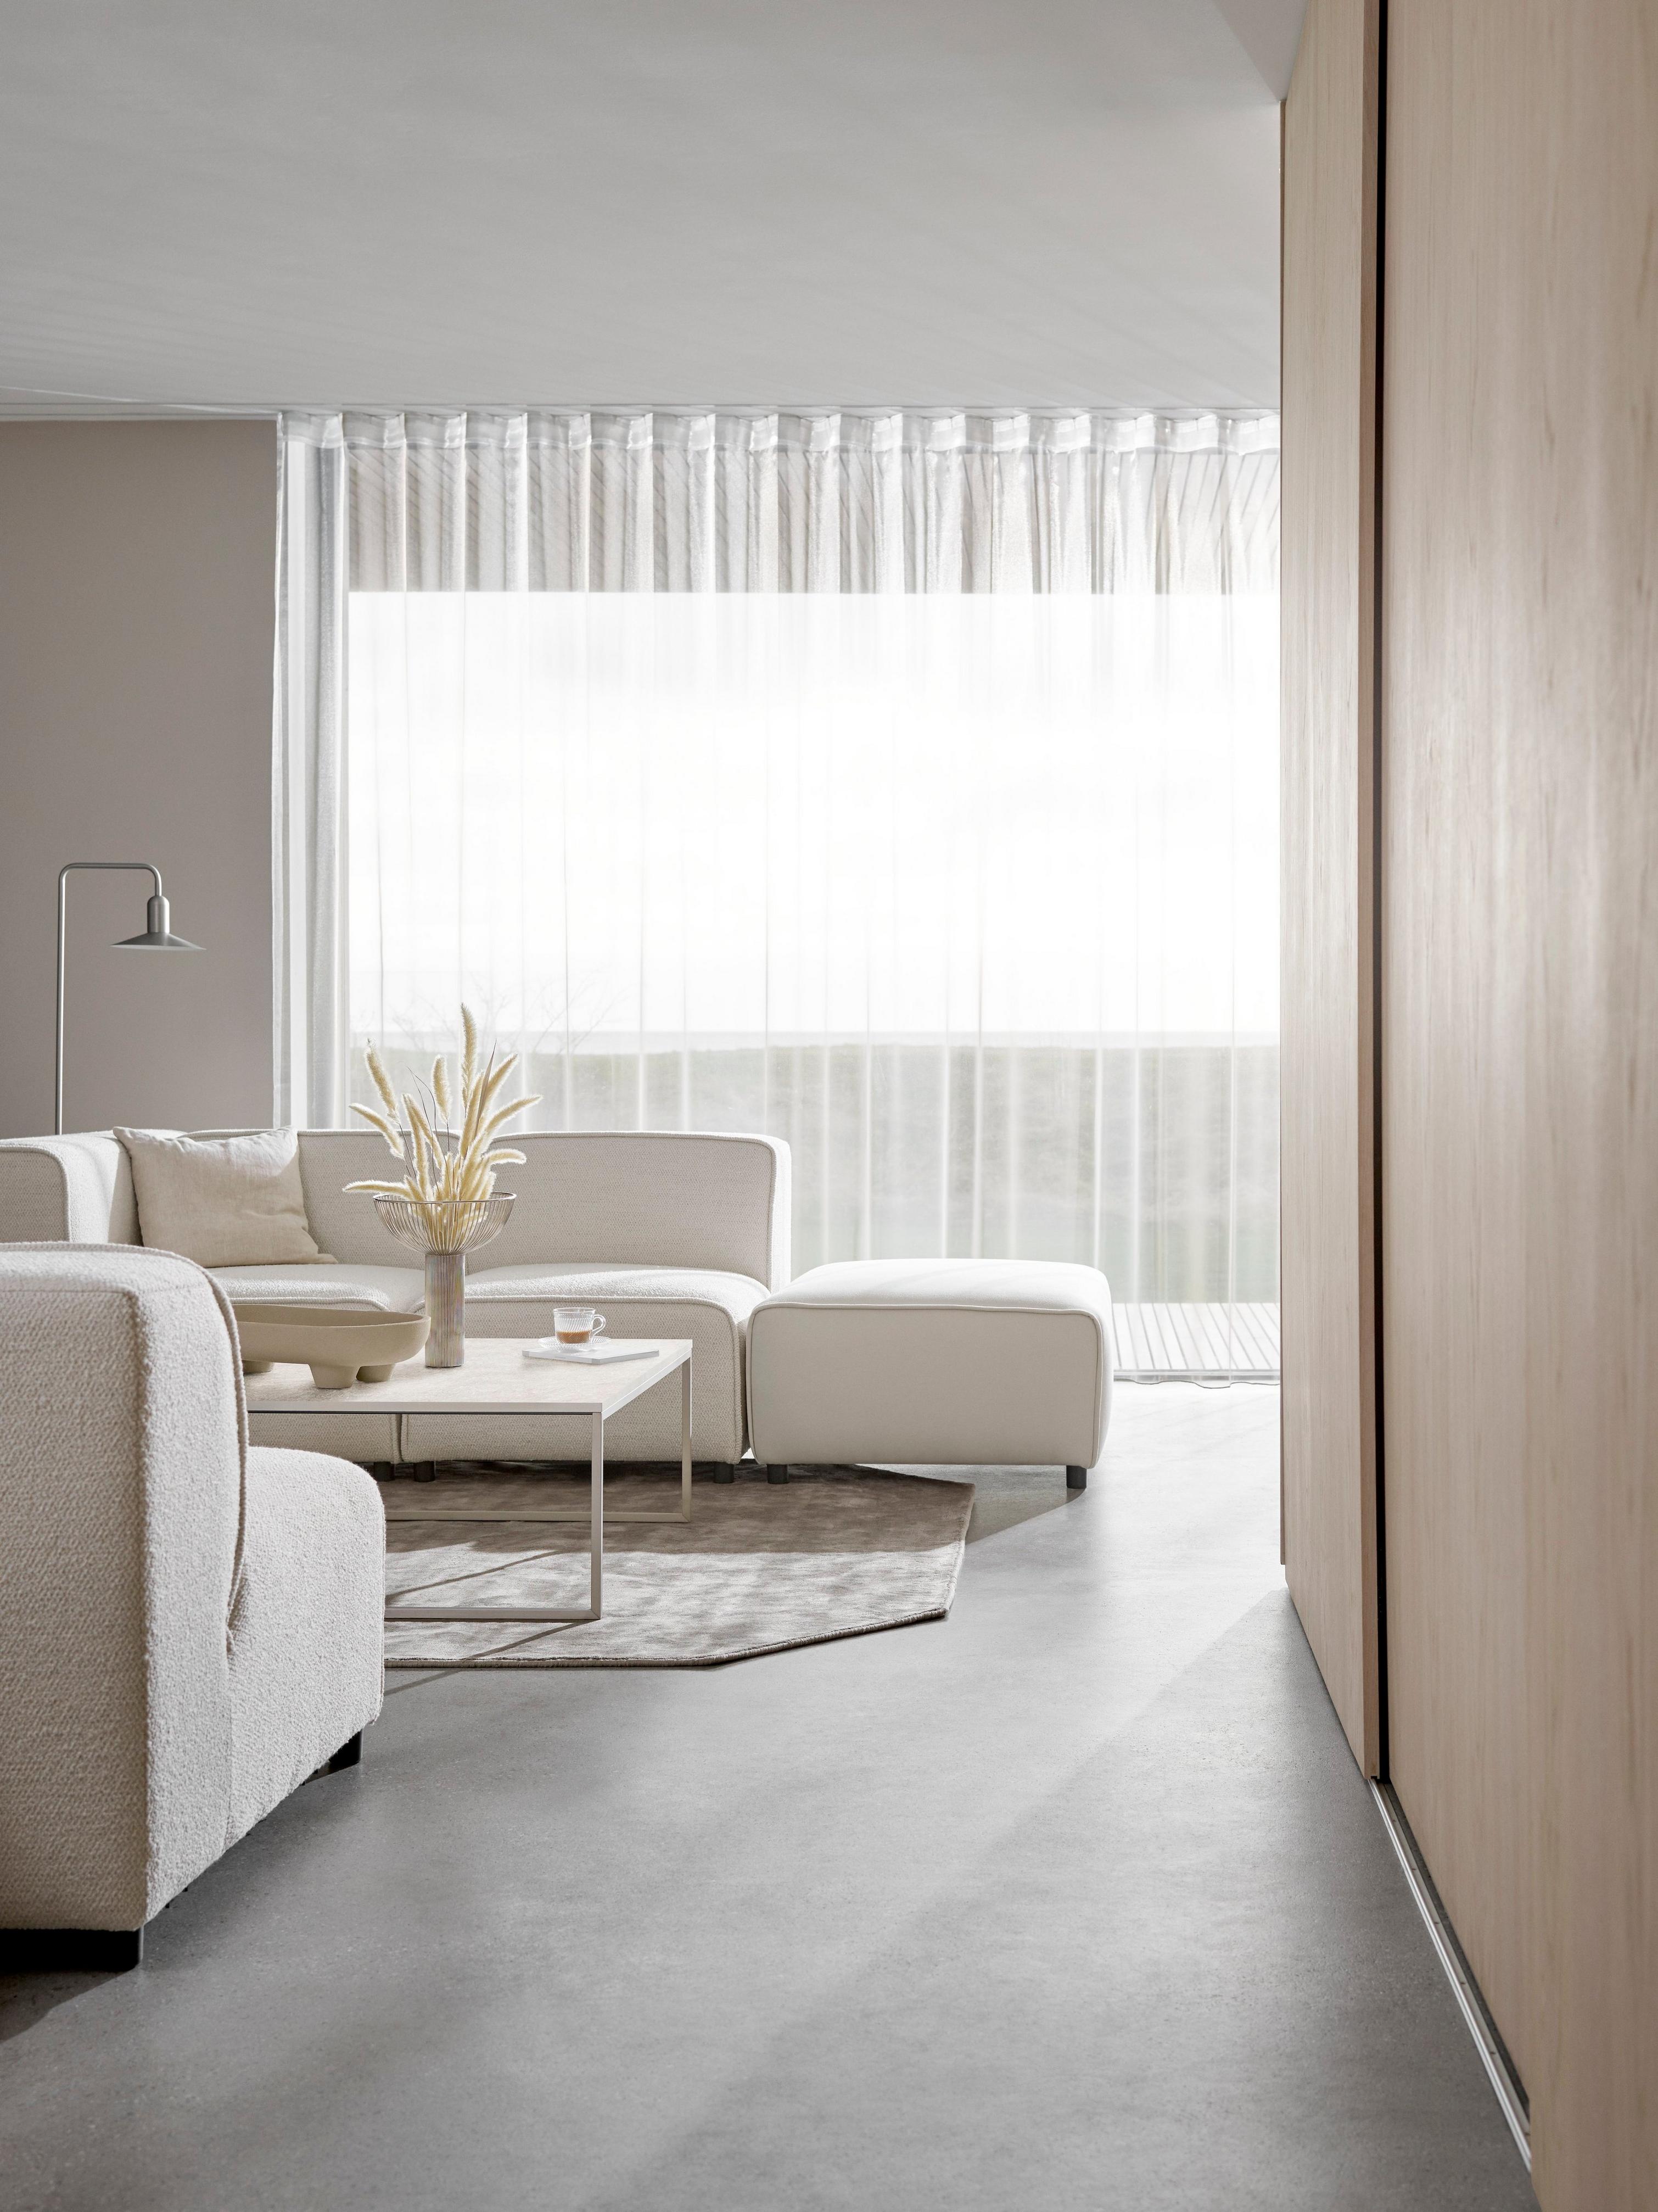 Cream-colored Carmo sofa in a minimalist living room, sheer curtains diffusing light